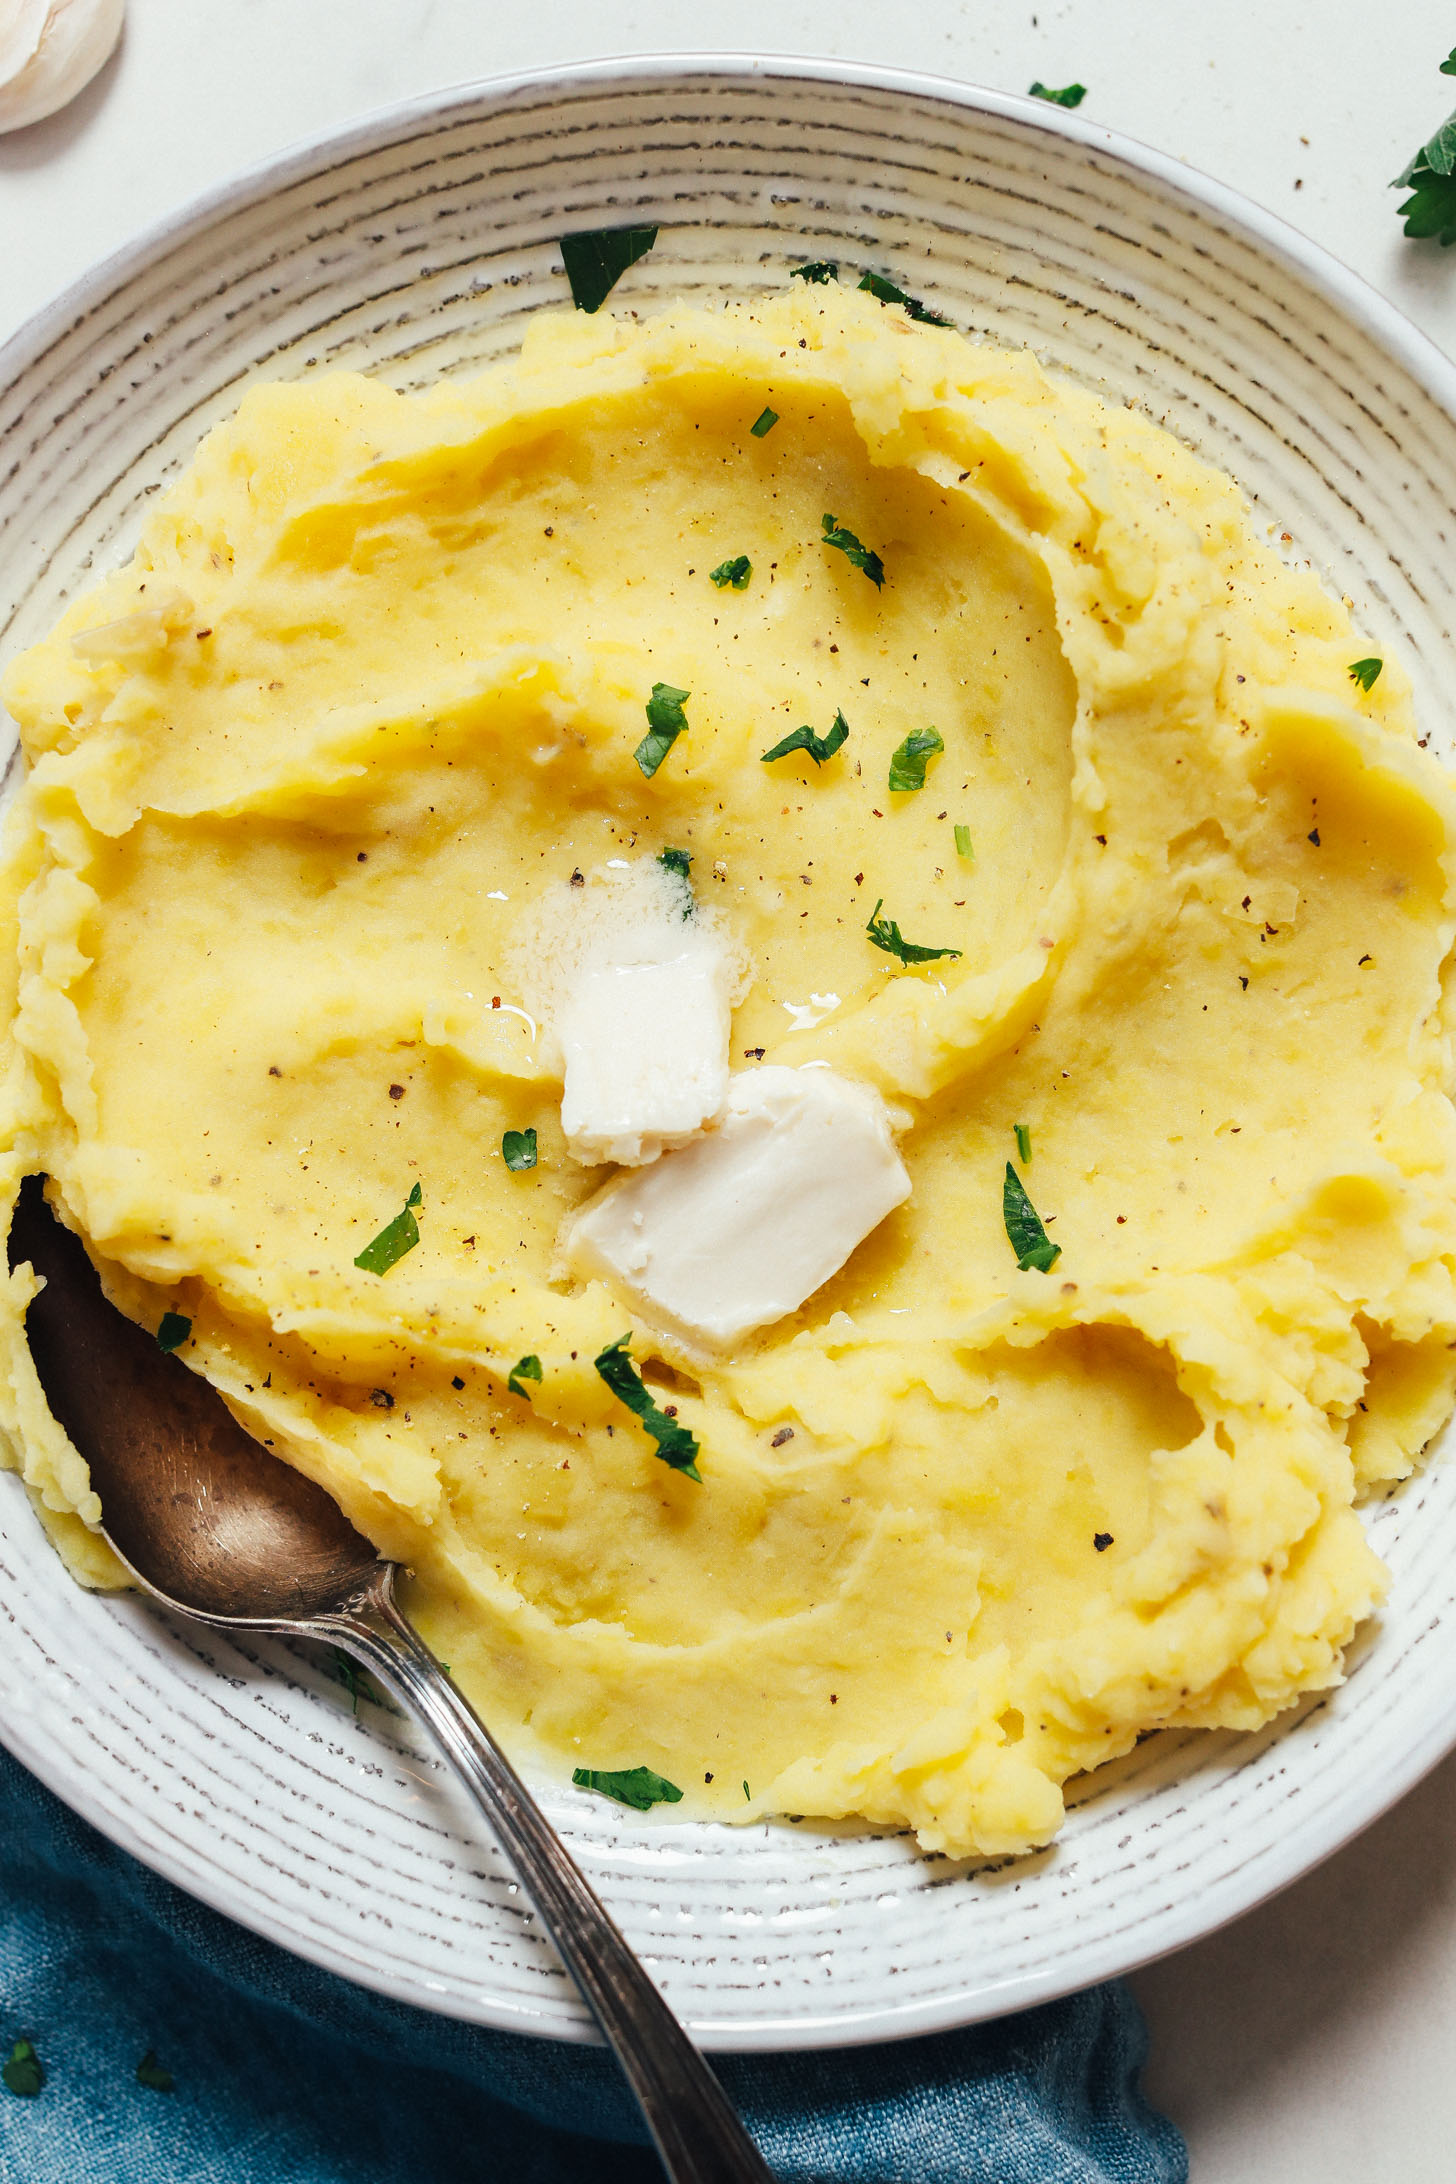 Slices of vegan butter melting on a bowl of Instant Pot mashed potatoes